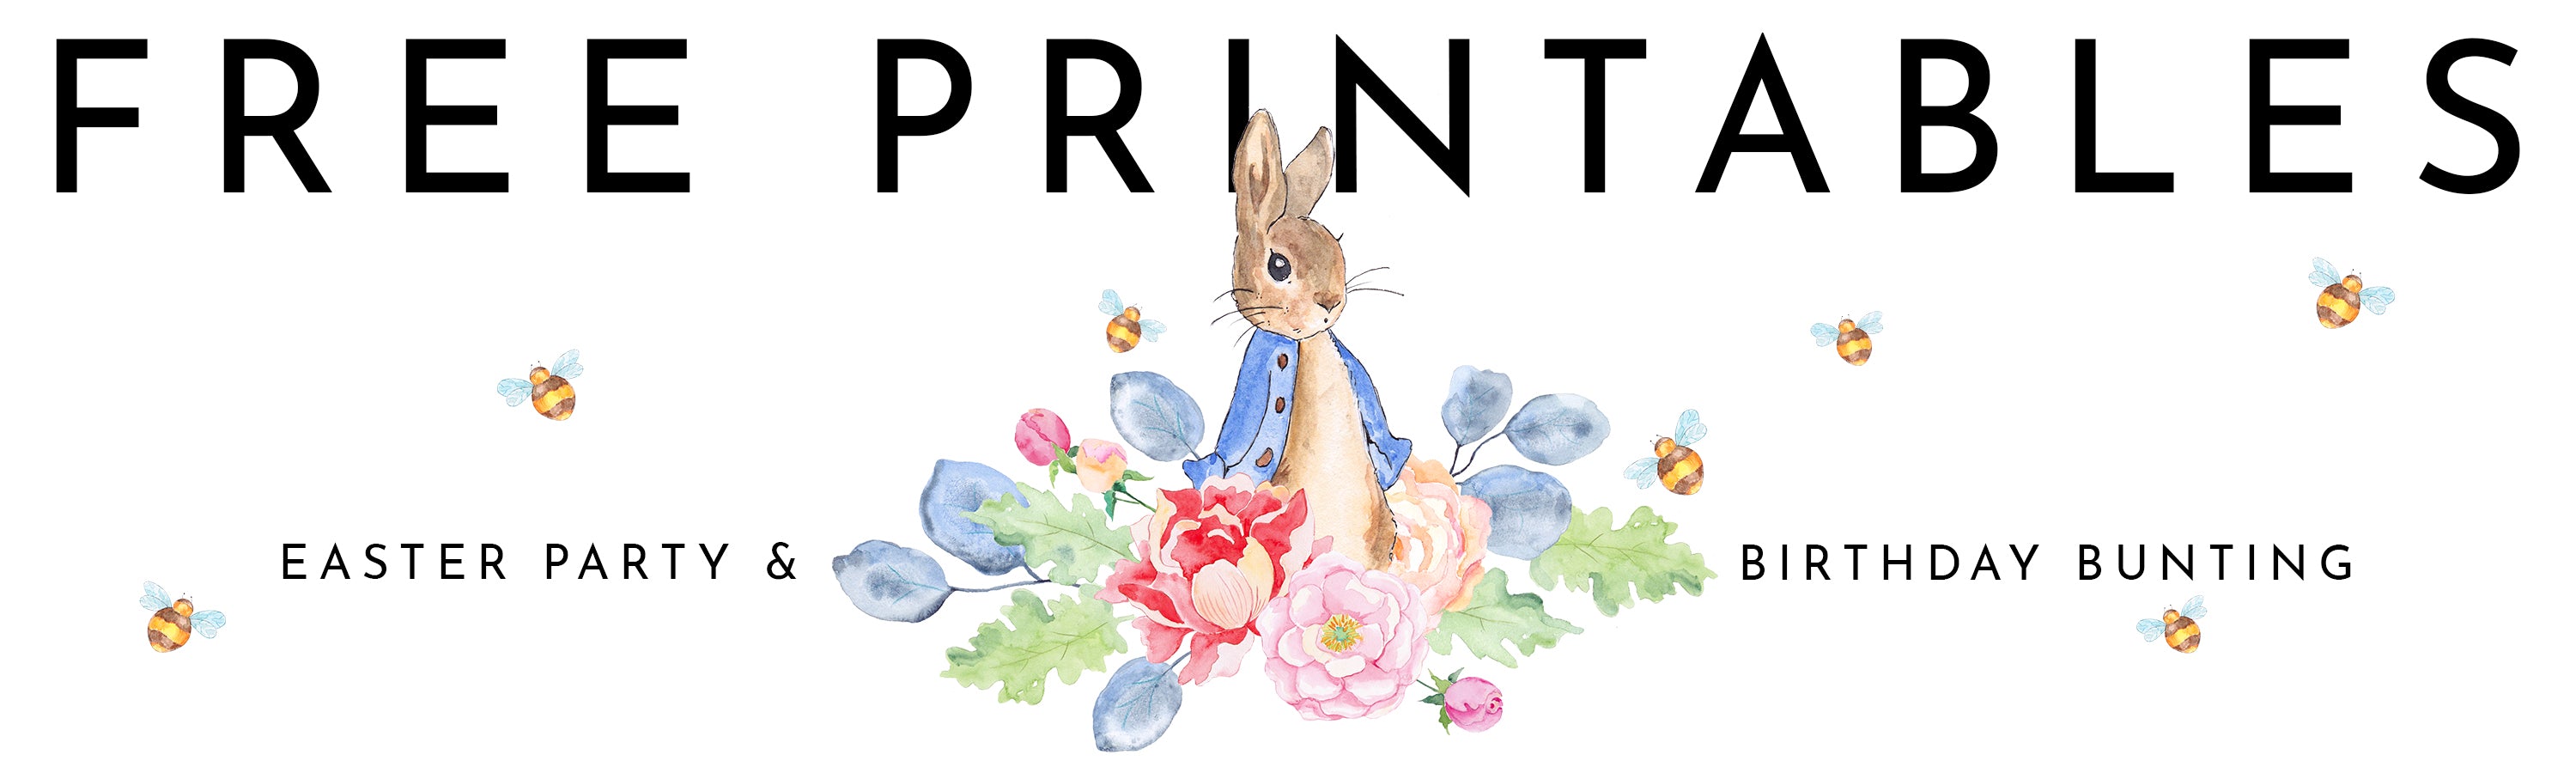 Free printables and digital downloads for kids